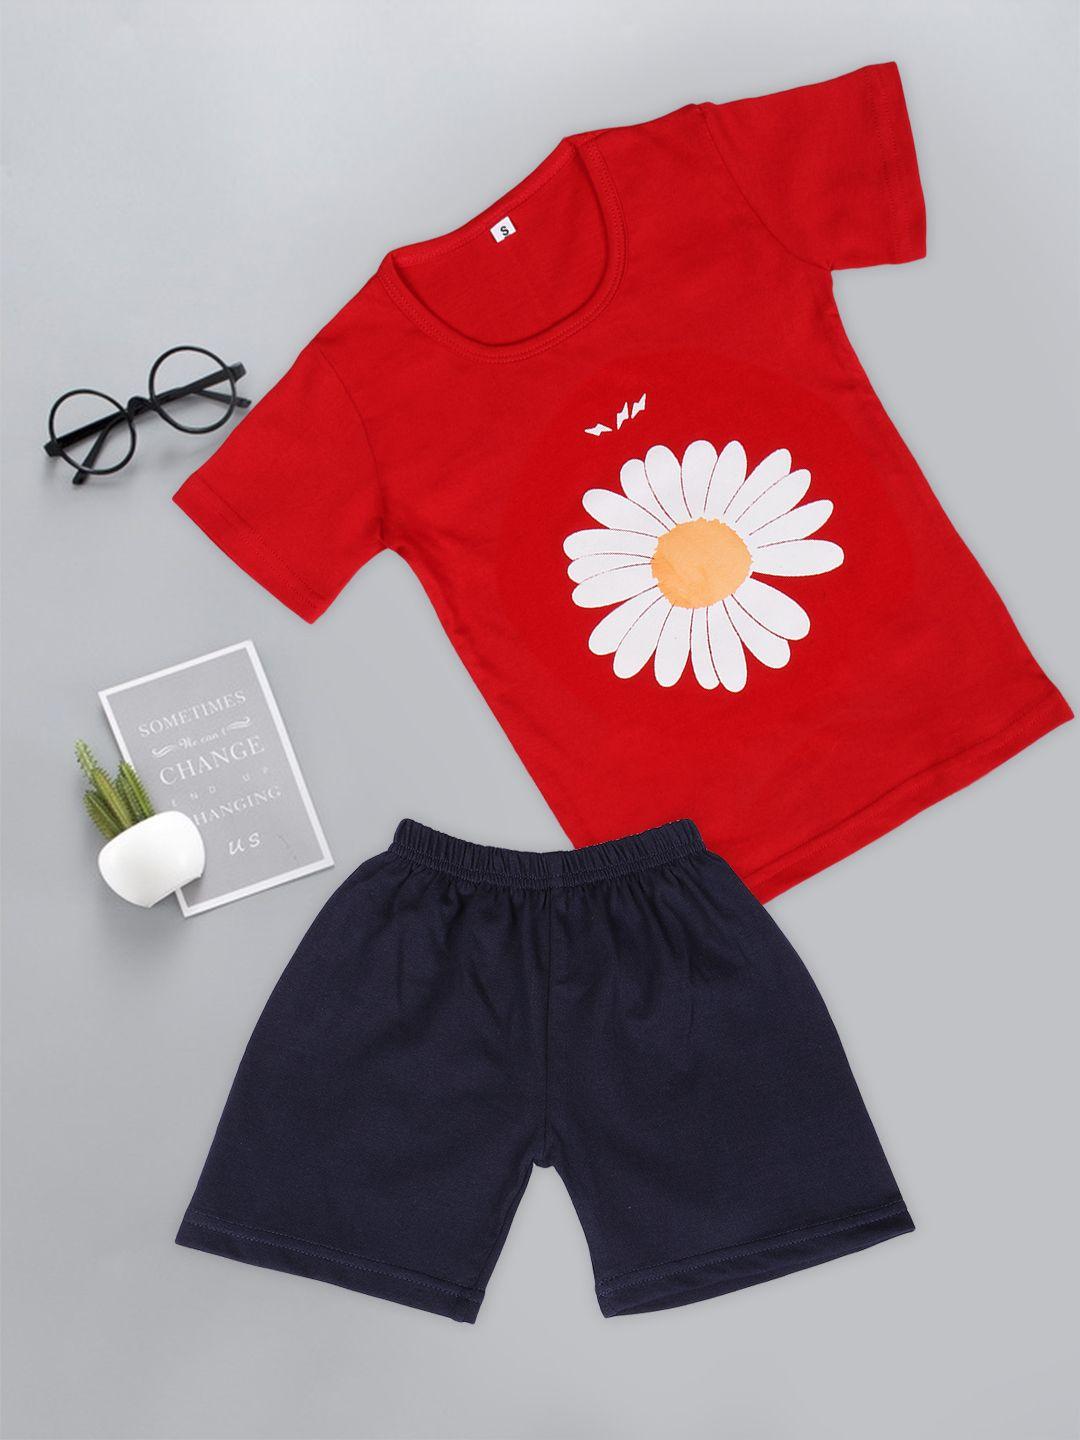 fashitale unisex kids red & navy blue printed t-shirt with shorts